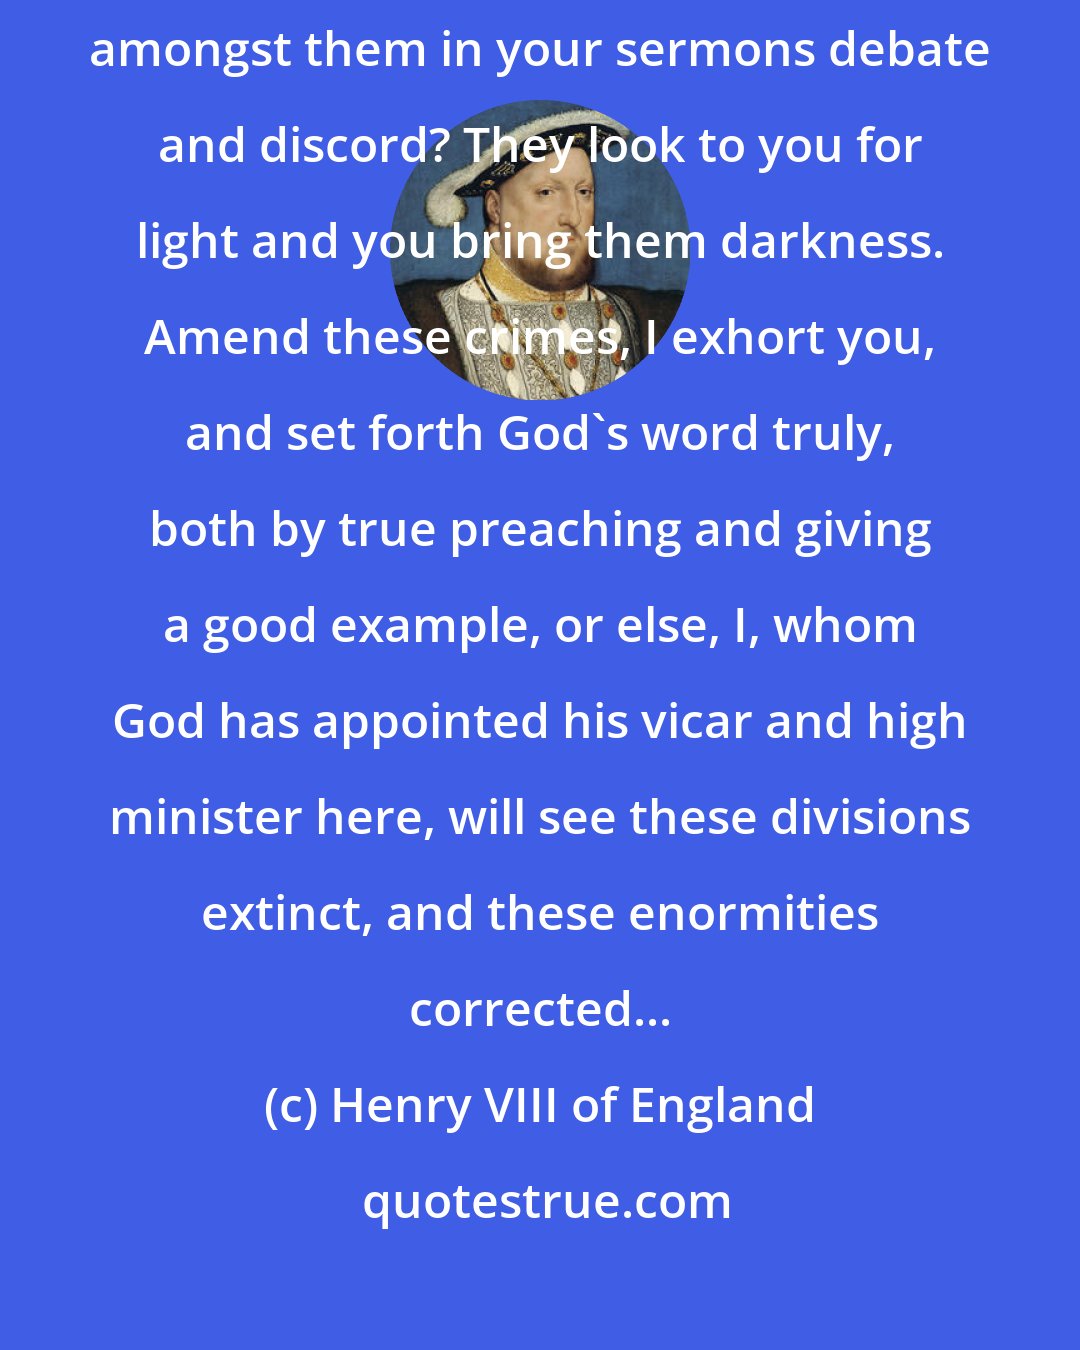 Henry VIII of England: Alas, how can the poor souls live in Concord when you preachers sow amongst them in your sermons debate and discord? They look to you for light and you bring them darkness. Amend these crimes, I exhort you, and set forth God's word truly, both by true preaching and giving a good example, or else, I, whom God has appointed his vicar and high minister here, will see these divisions extinct, and these enormities corrected...